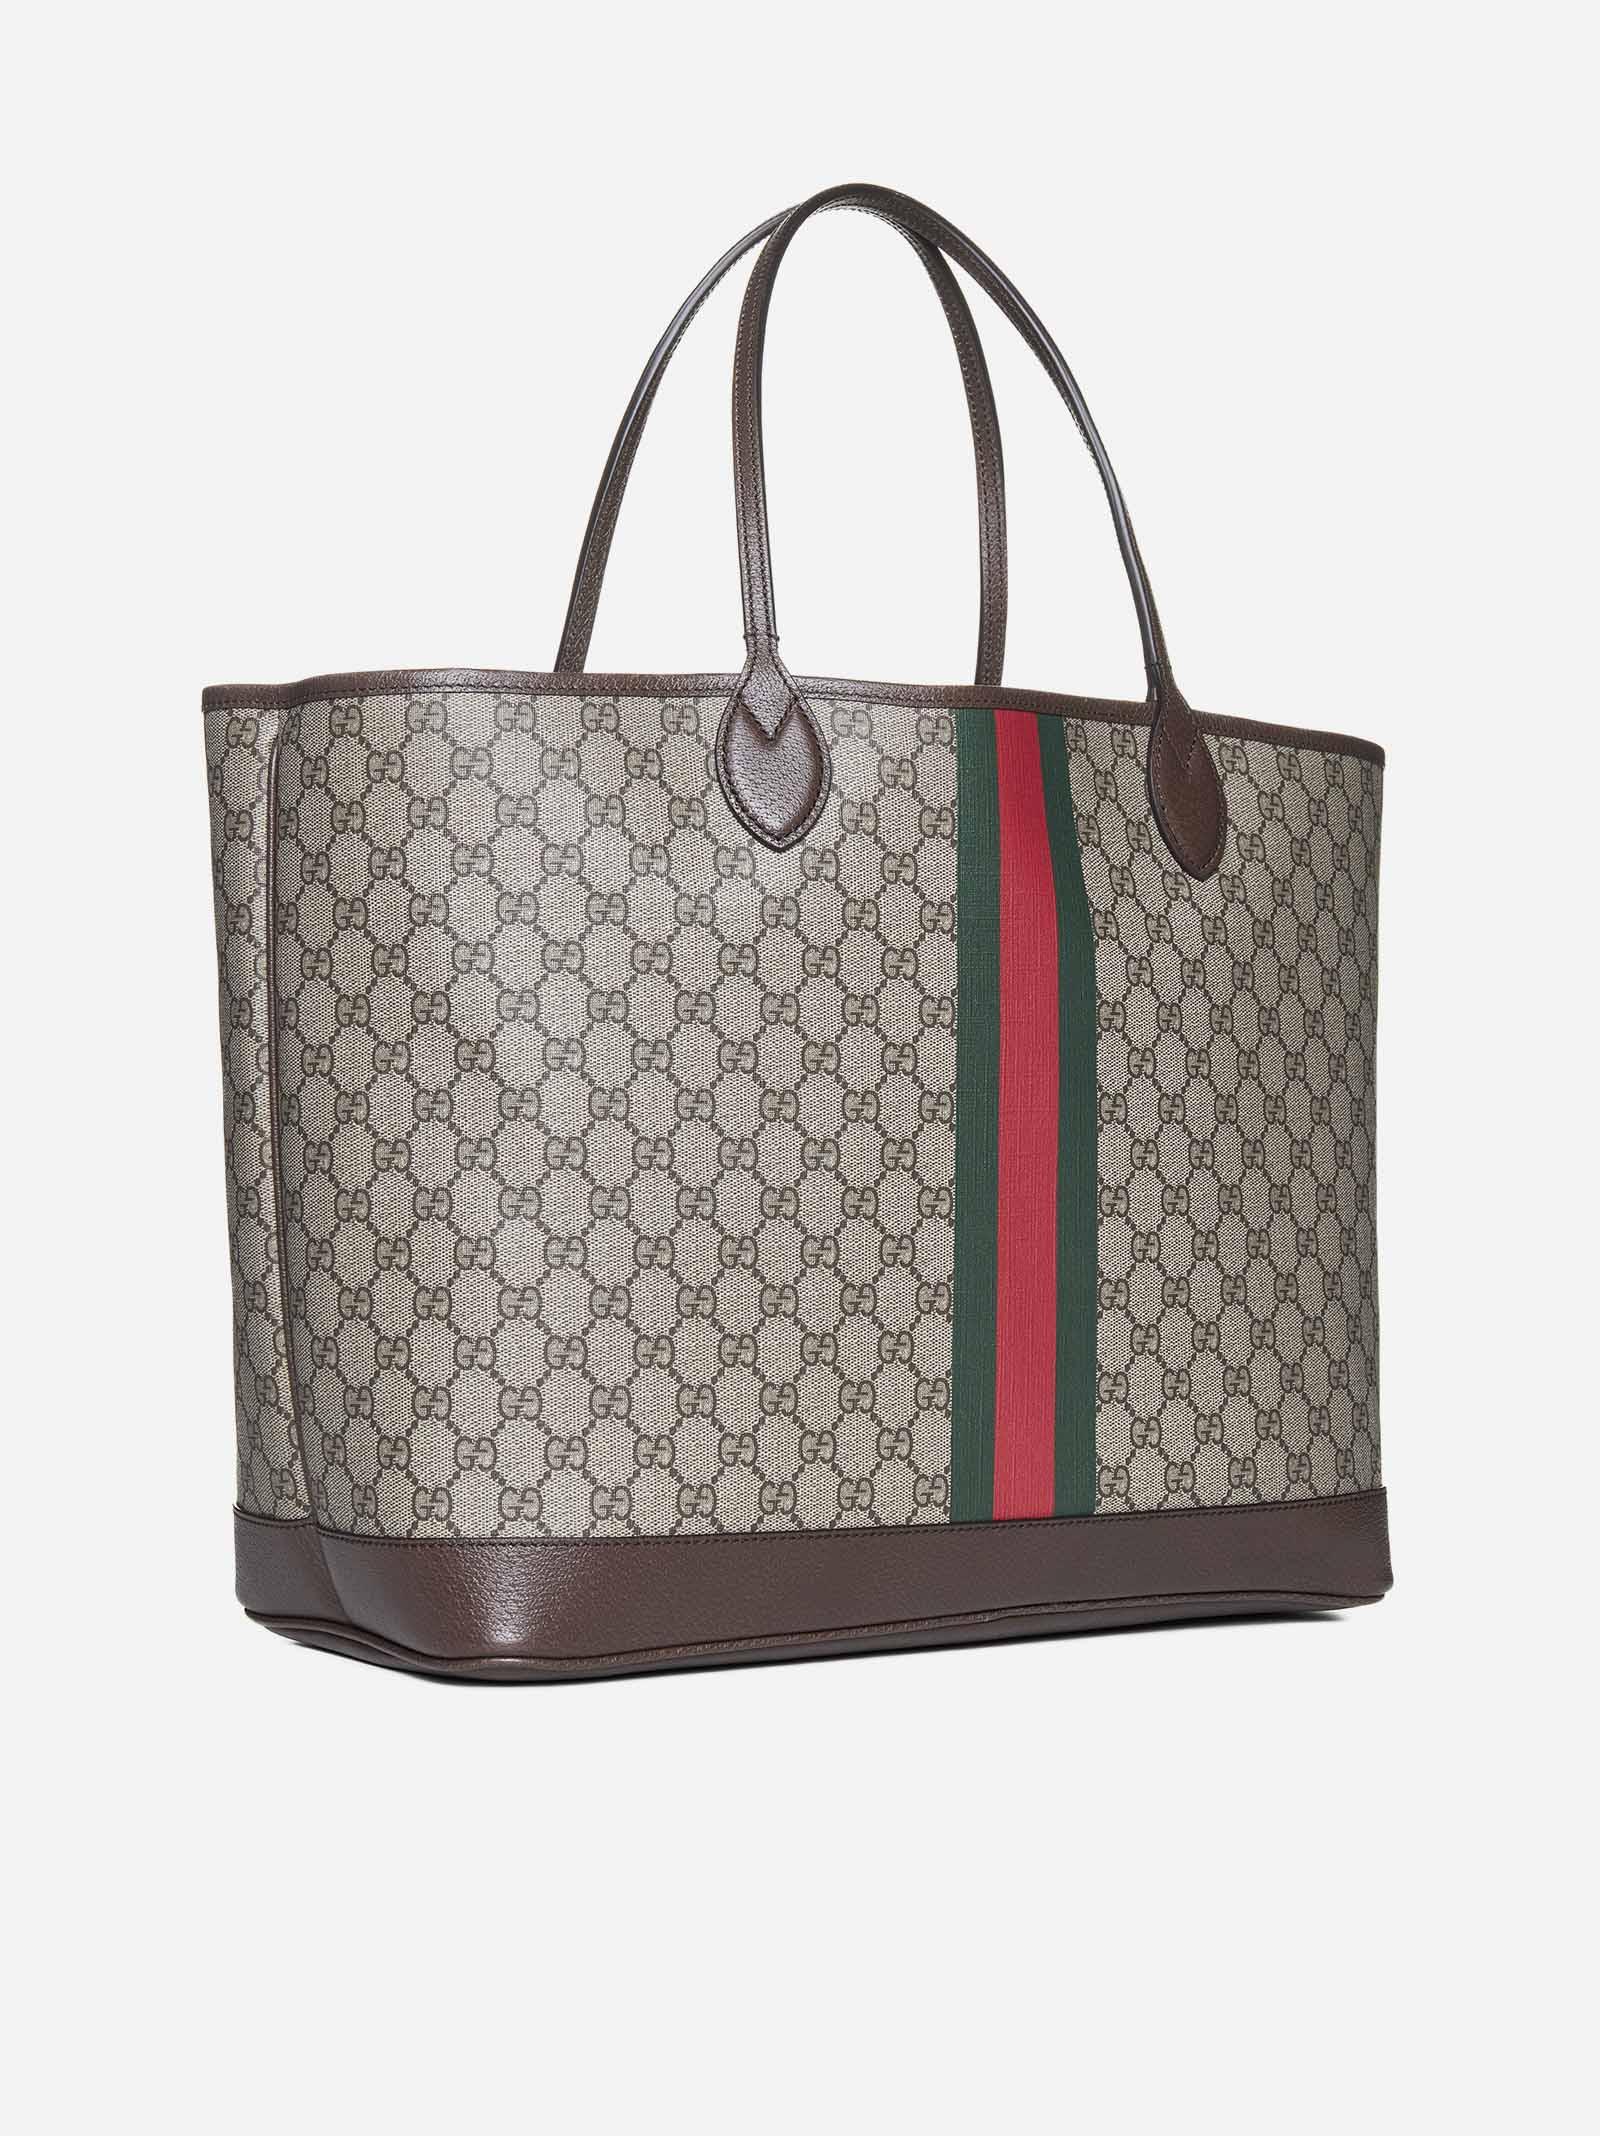 Gucci Ophidia GG Large Tote Bag in Brown | Lyst UK